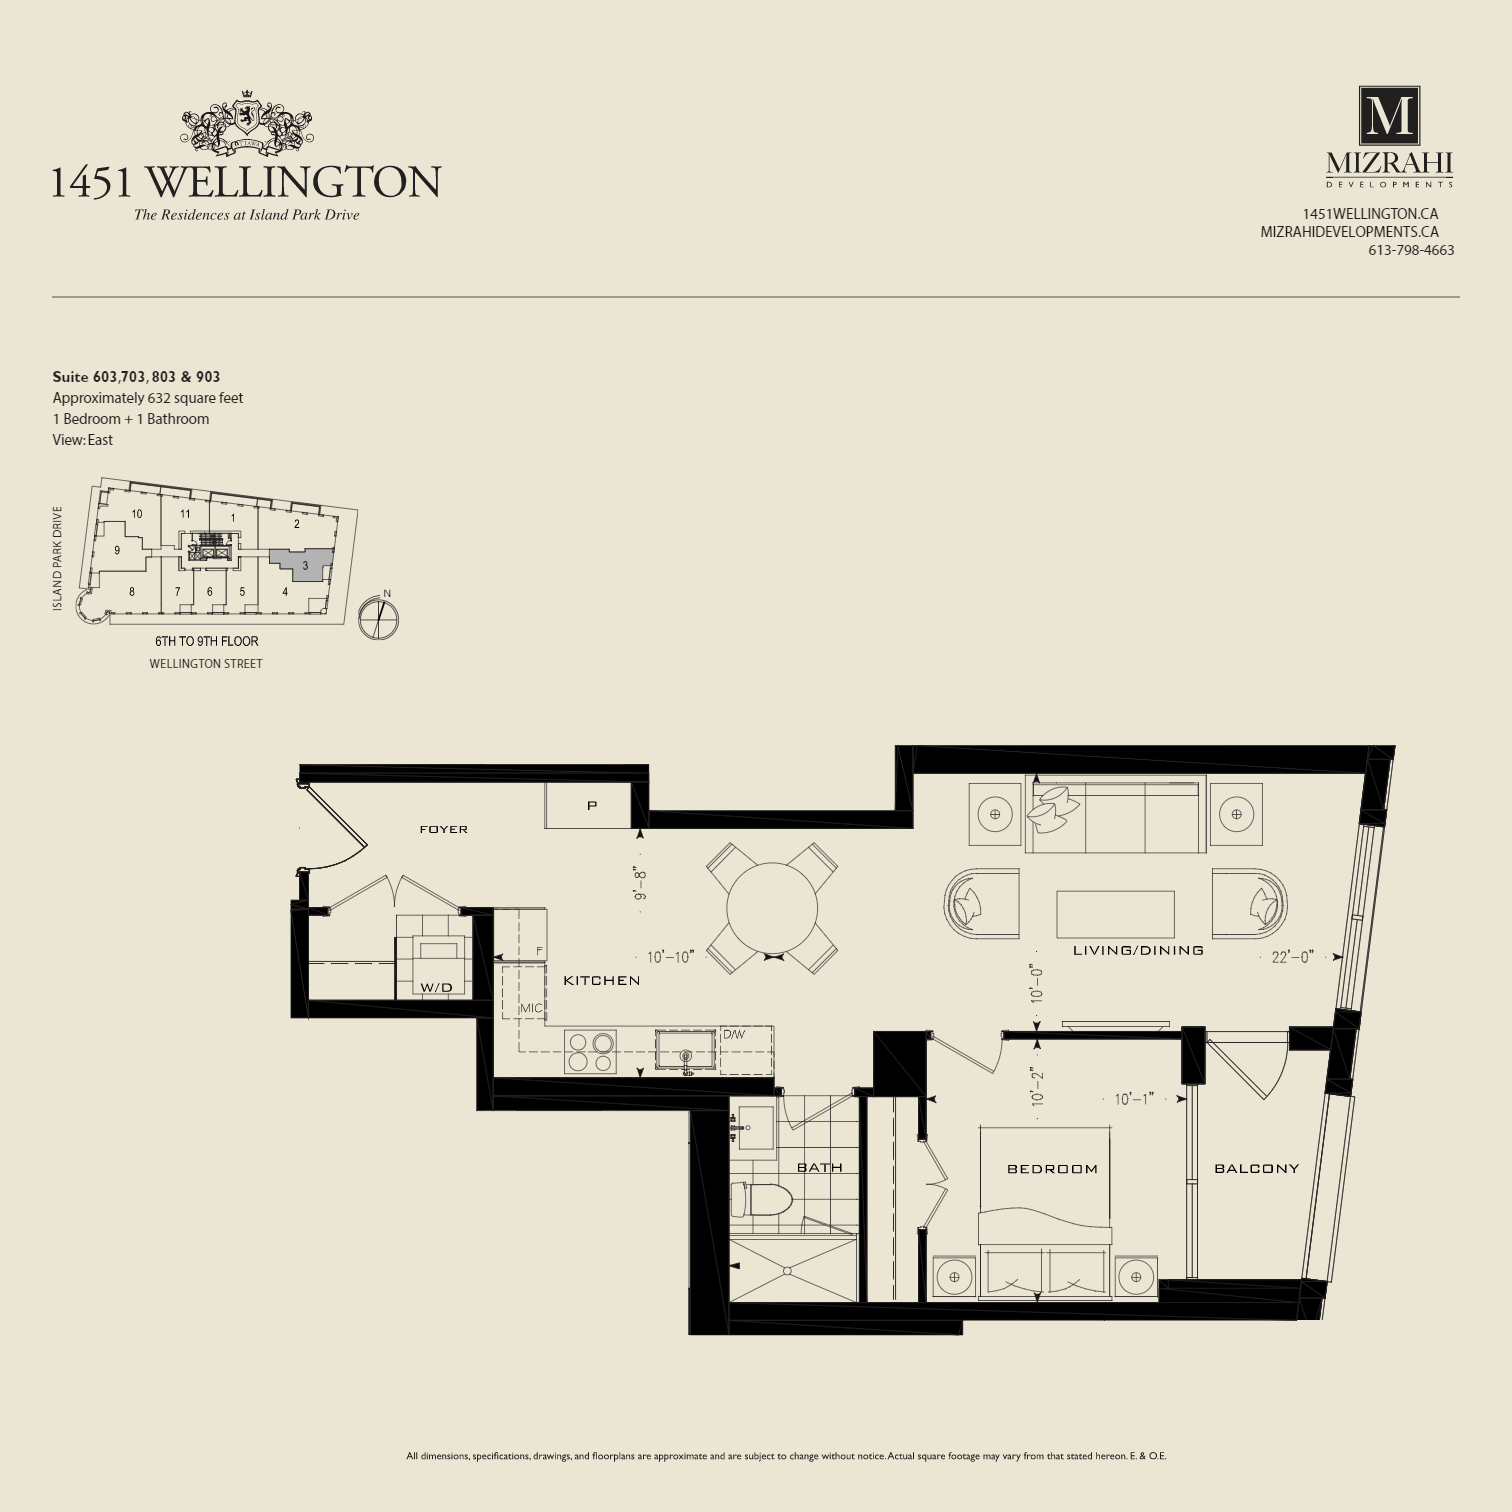 632 sq ft Floor Plan of The Residences at Island Park Drive Condos with undefined beds